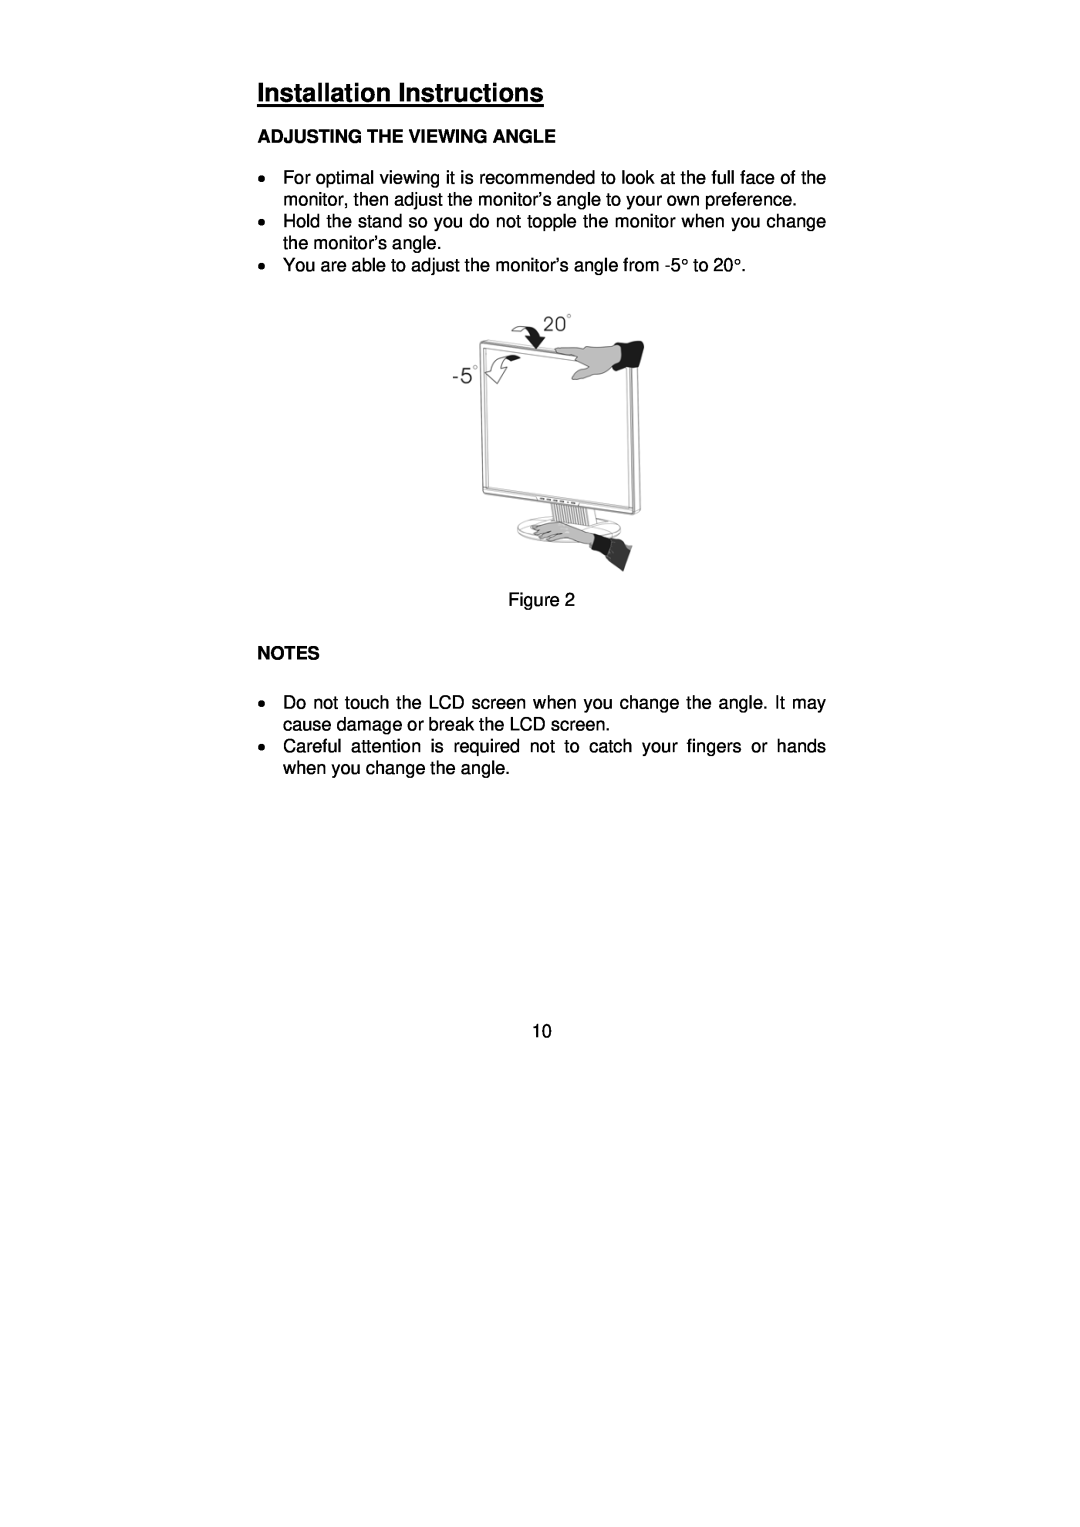 Planar PL1900 manual Adjusting The Viewing Angle, Installation Instructions 